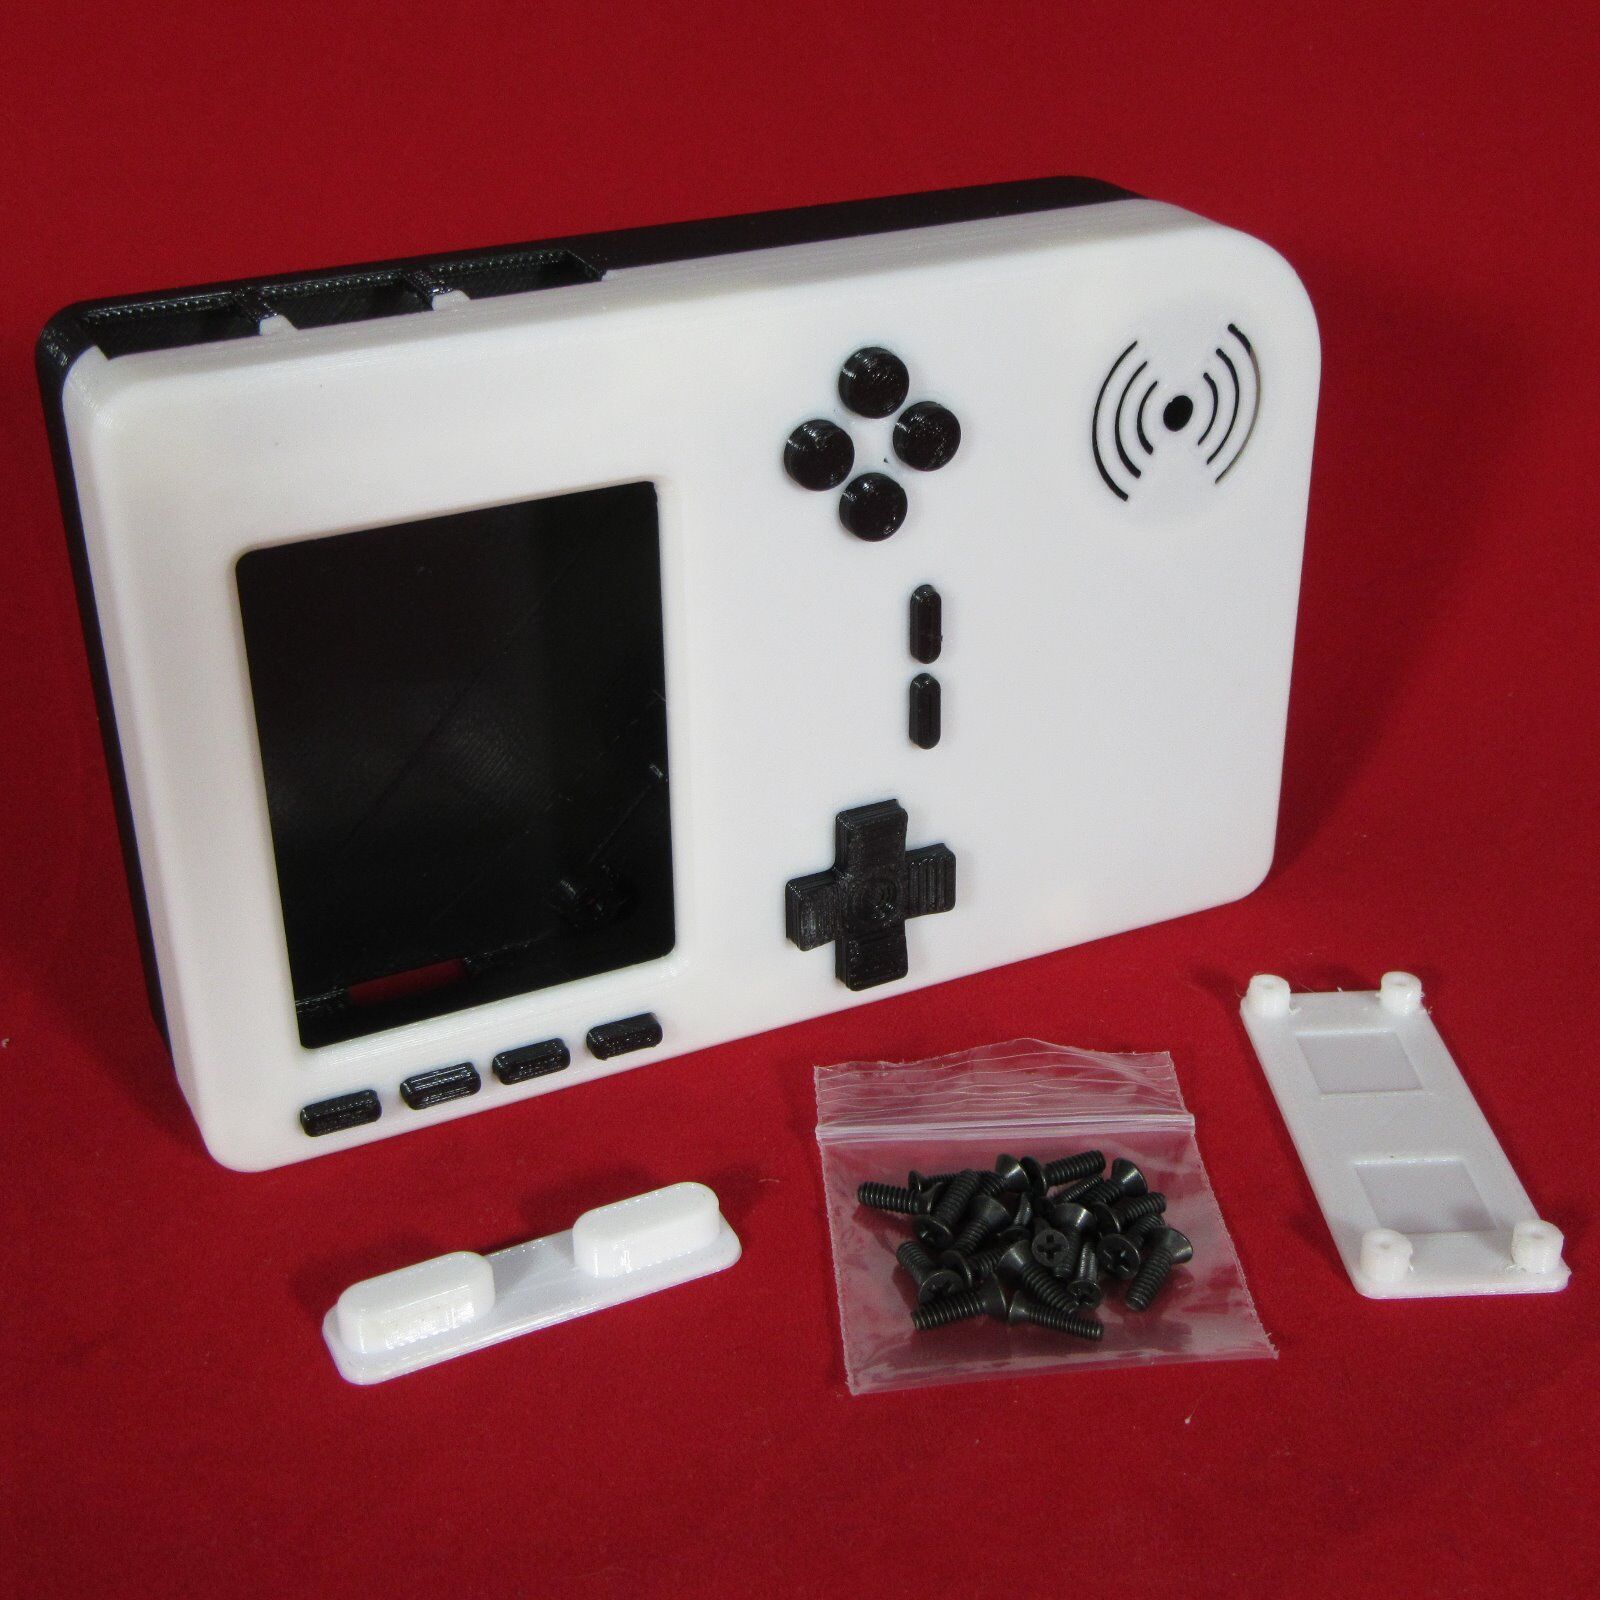 PiGRRL 2 White & Black Game Boy Case with Buttons & Screws for Raspberry Pi 2/3 